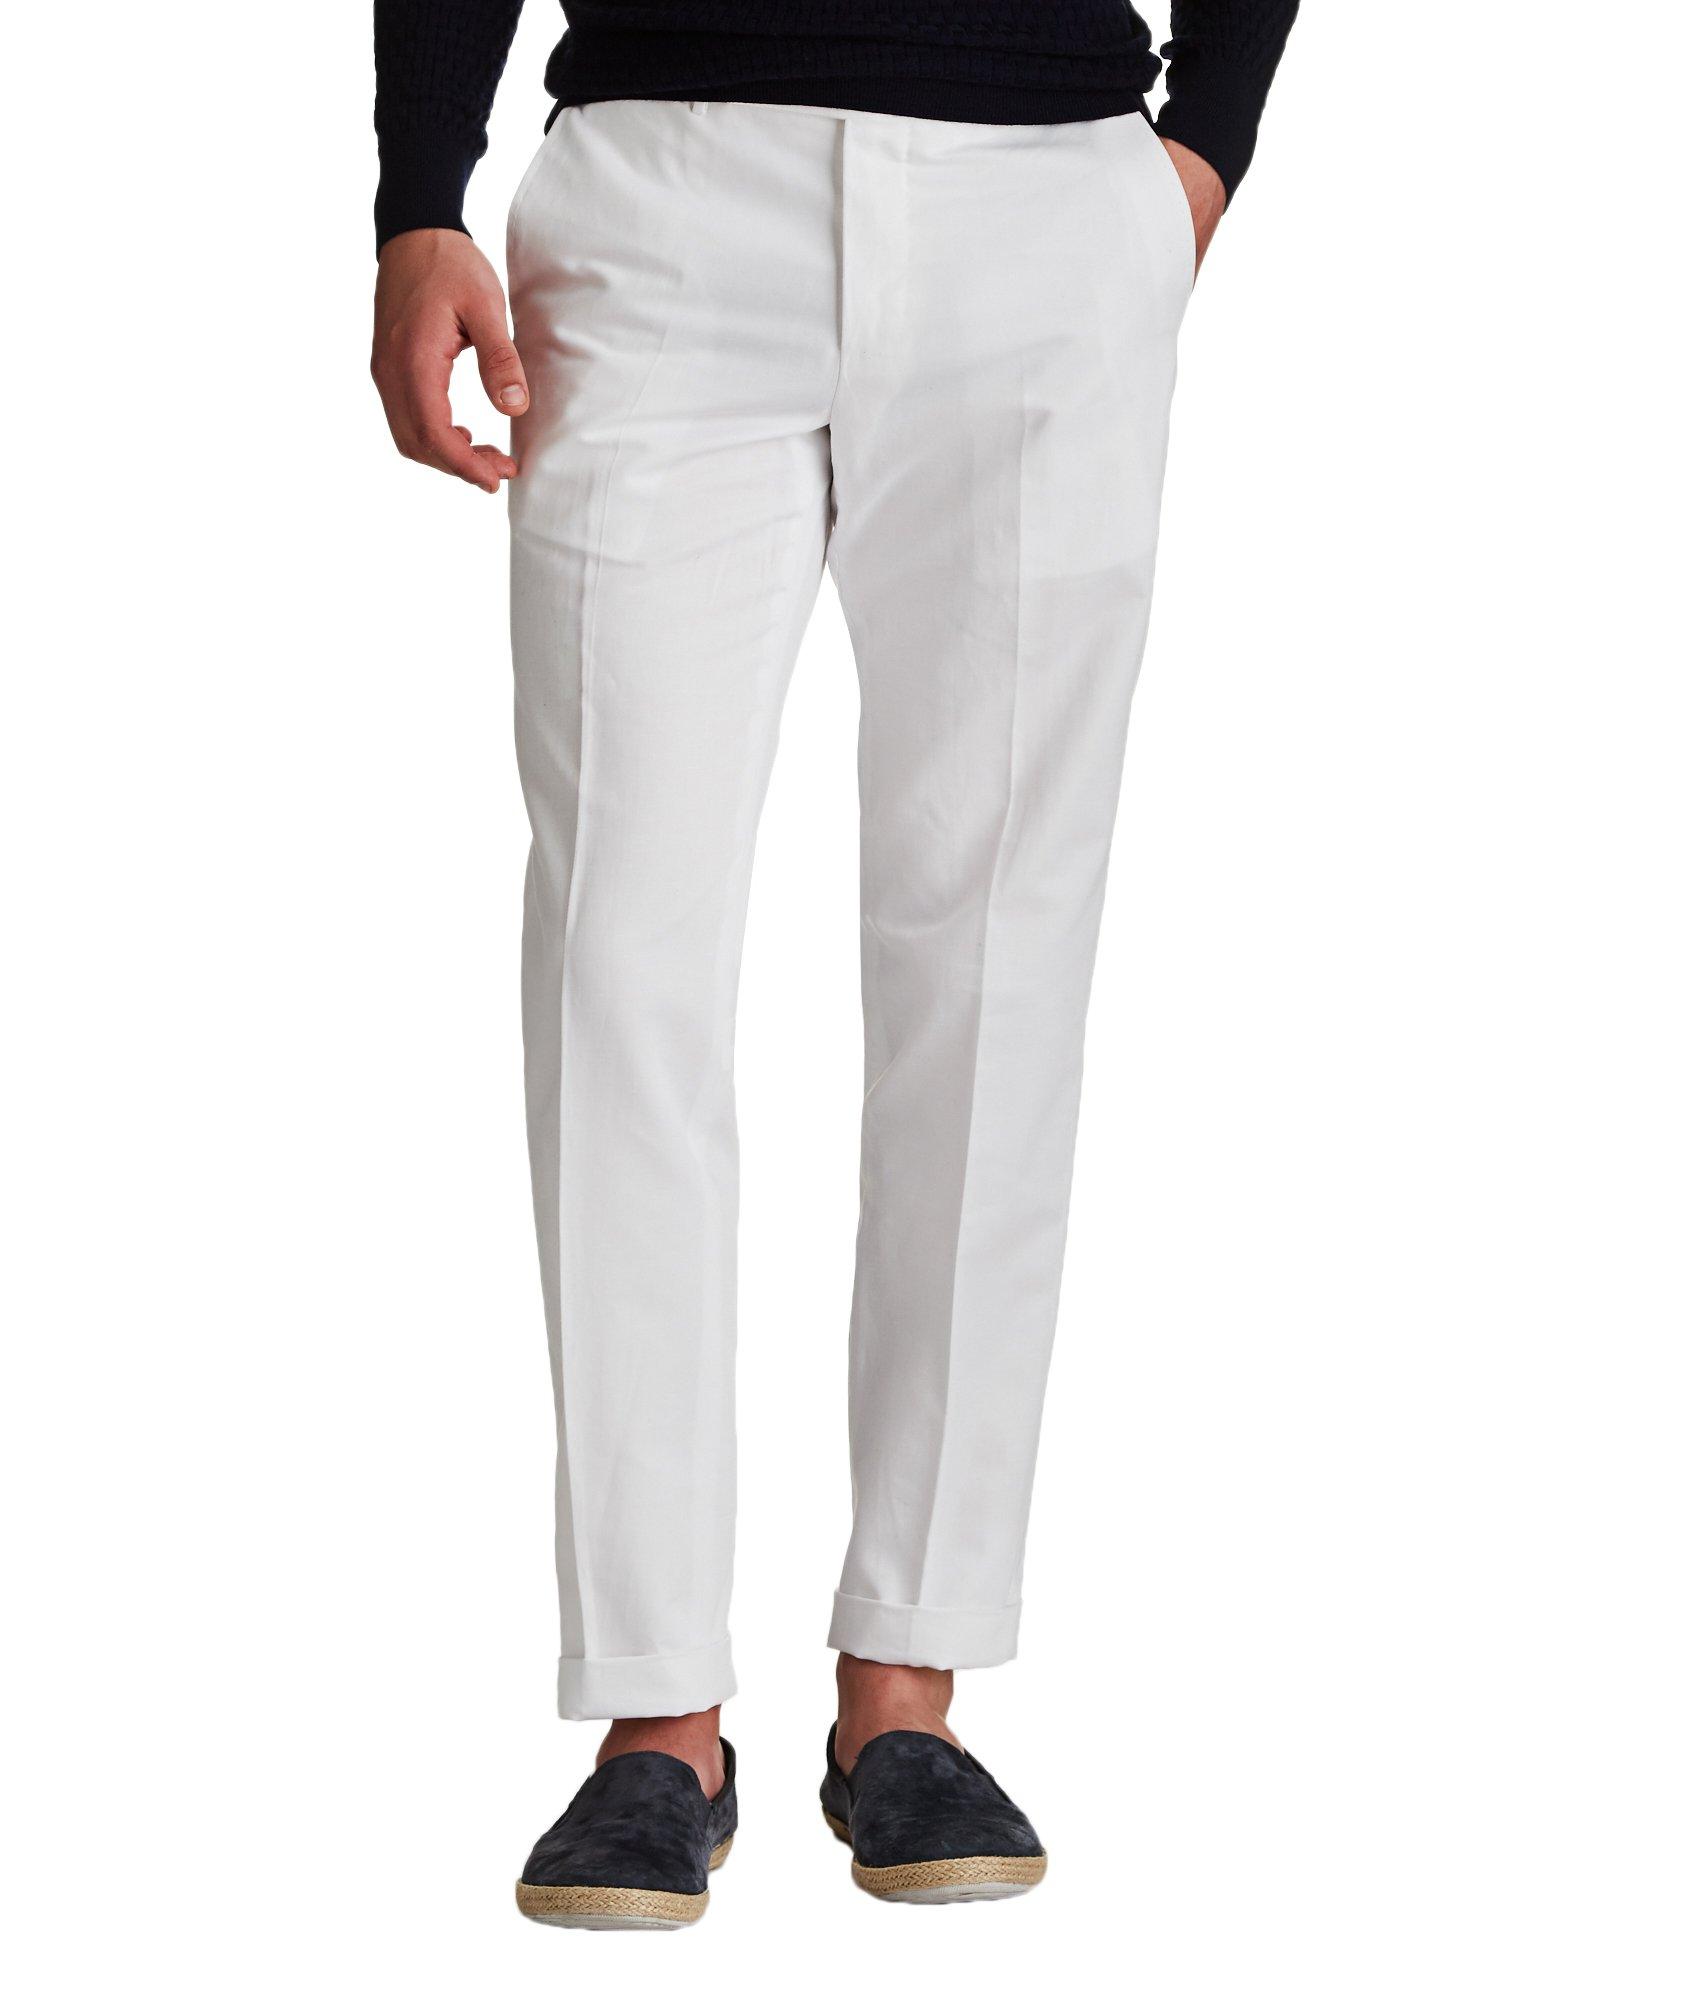 Cotton & Linen Blend Chinos image 0